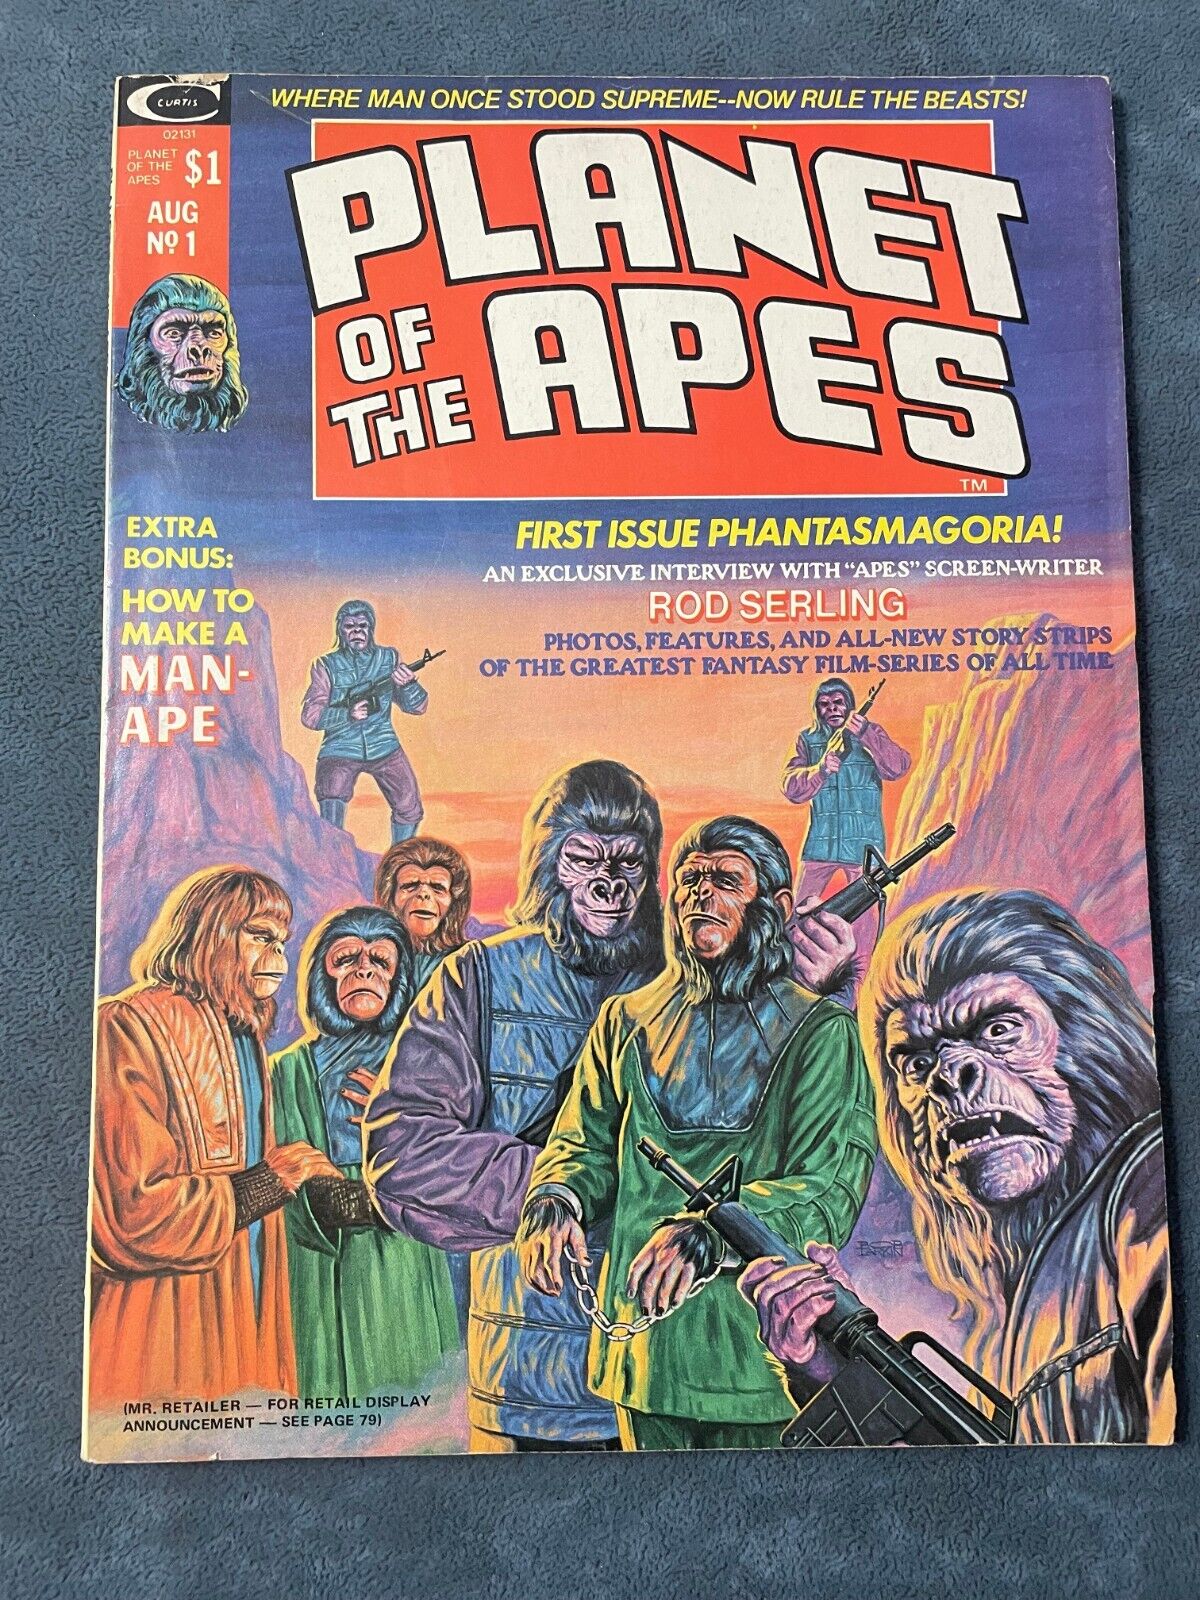 Planet of the Apes Magazine #1 1974 Marvel Comics Softcover VG